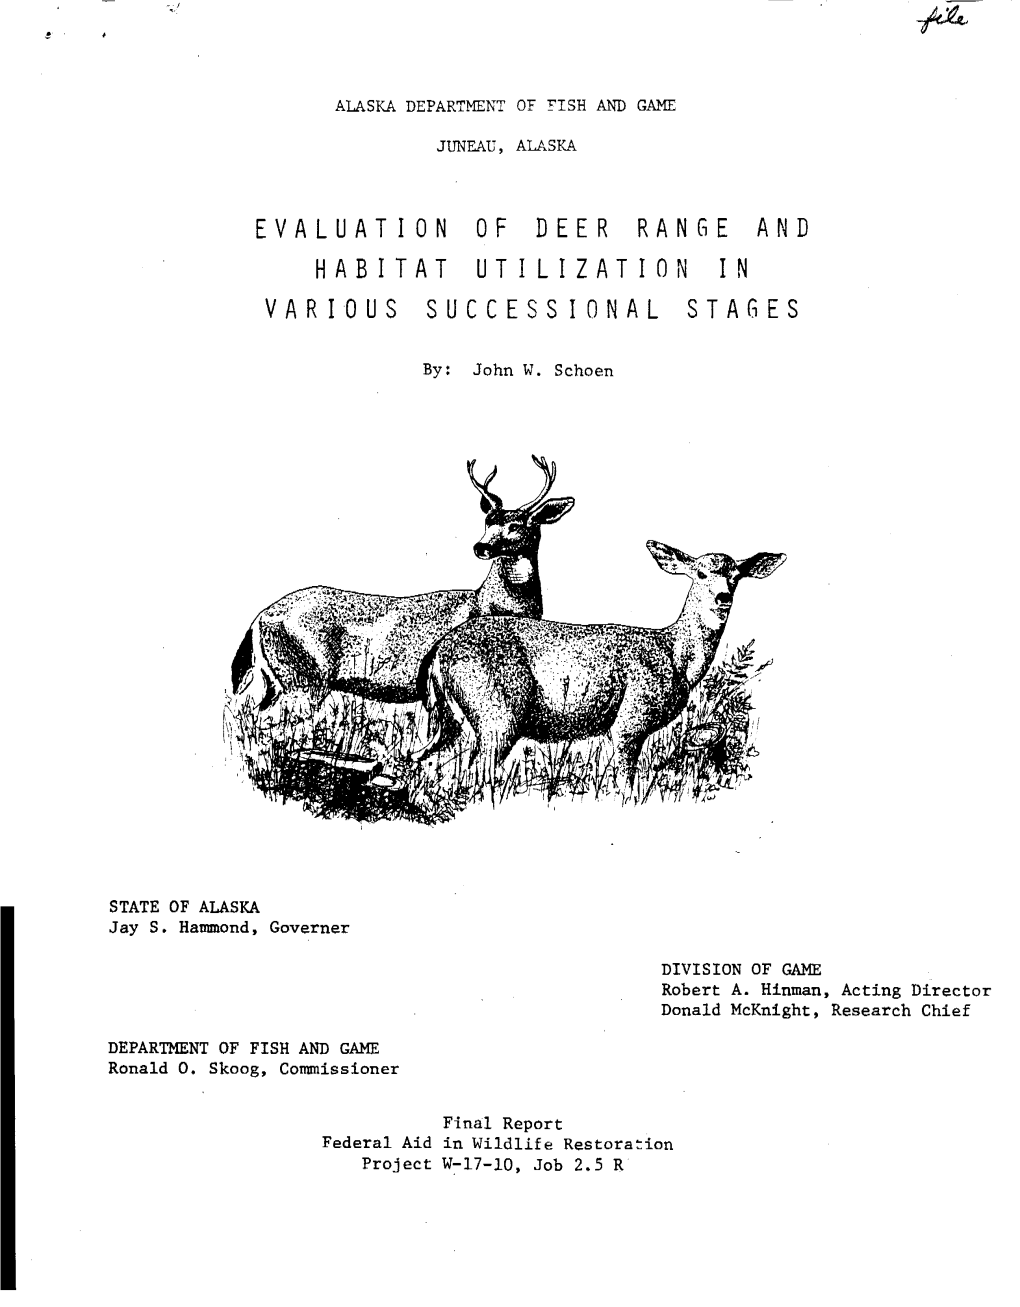 Evaluation of Deer Range and Habitat Utilization in Various Successional Stages